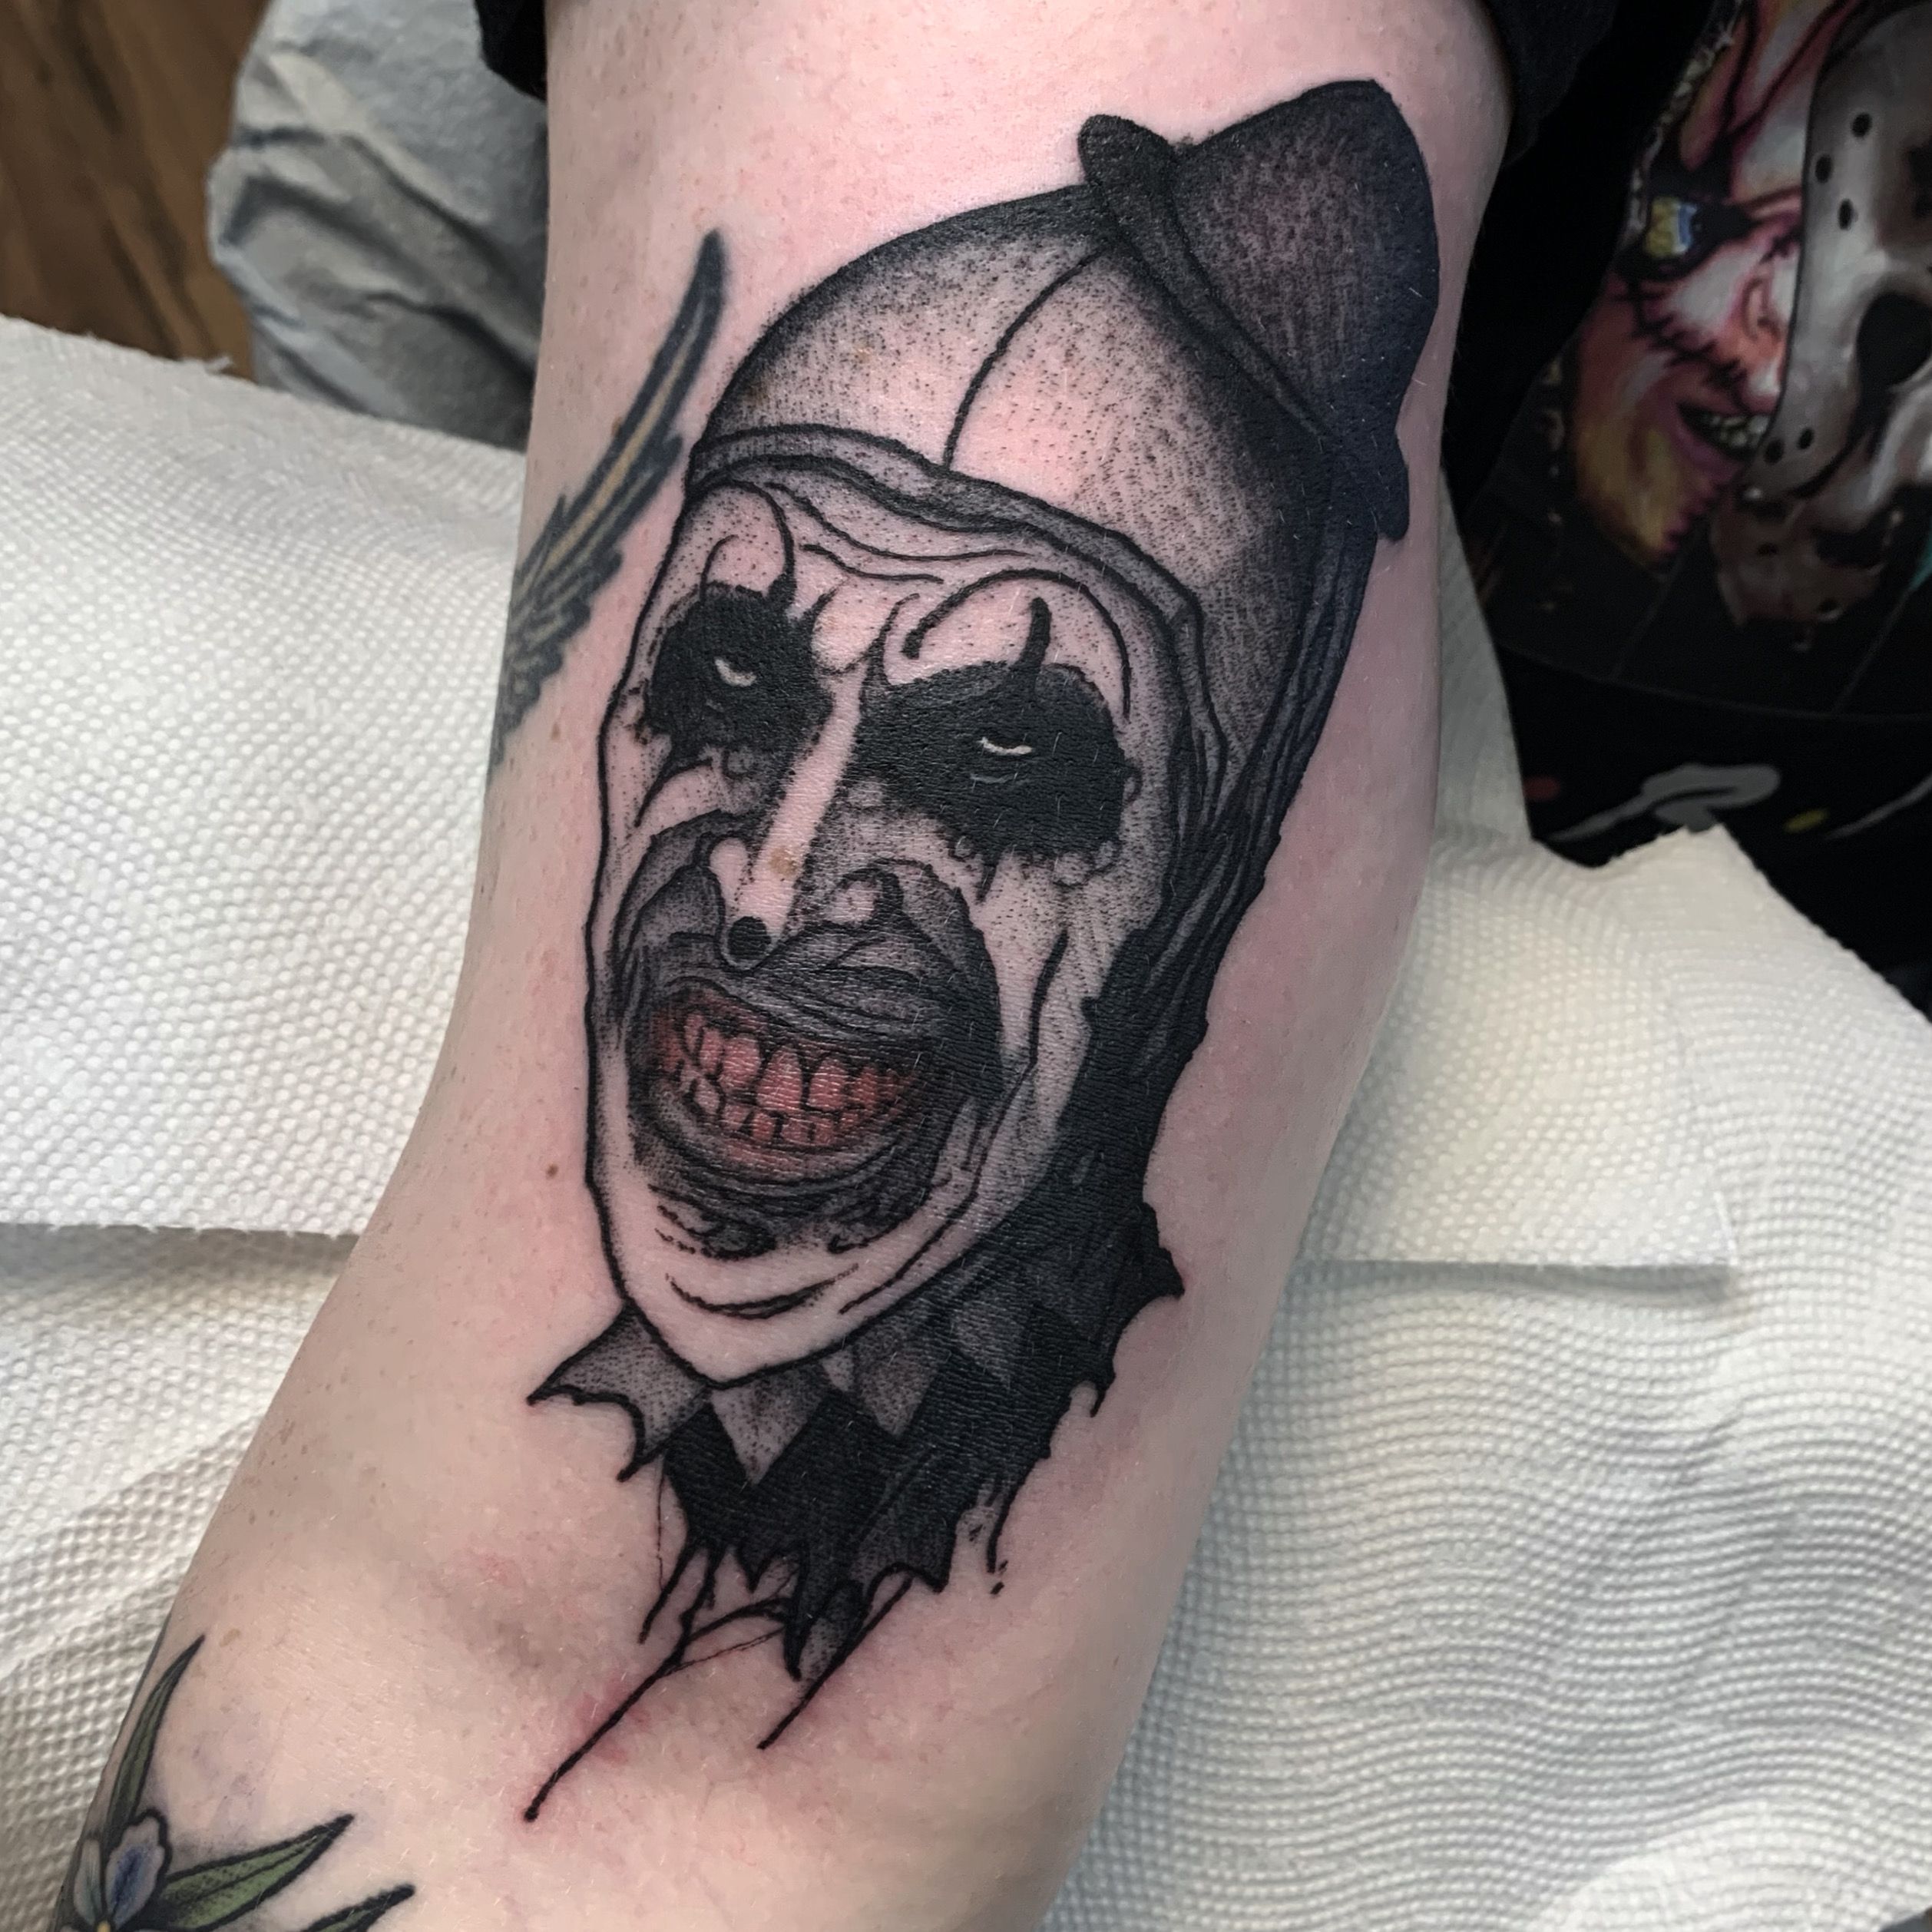 Art The Clown  Another amazing Art the Clown tattoo courtesy of Erick  Larios and tattoo artist Chris Lowk Great work  Facebook